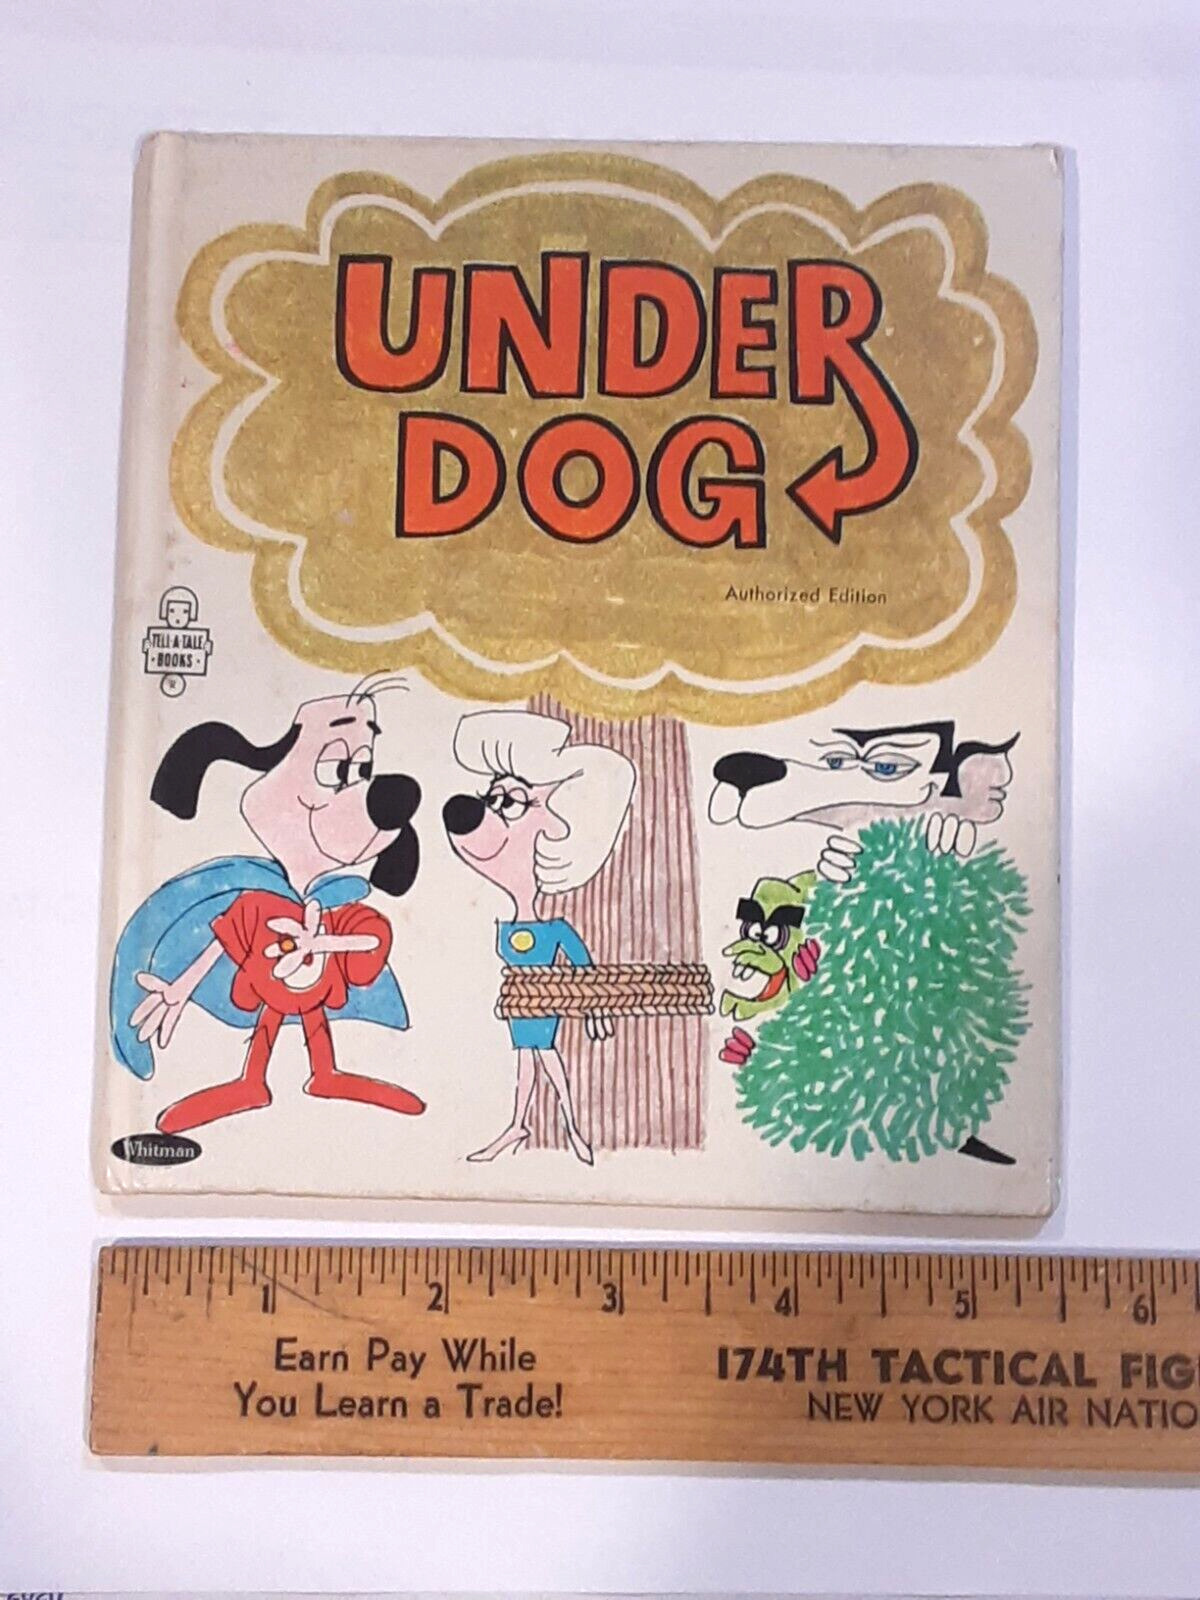 VINTAGE UNDERDOG TELL A TALE SMALL HARDCOVER BOOK